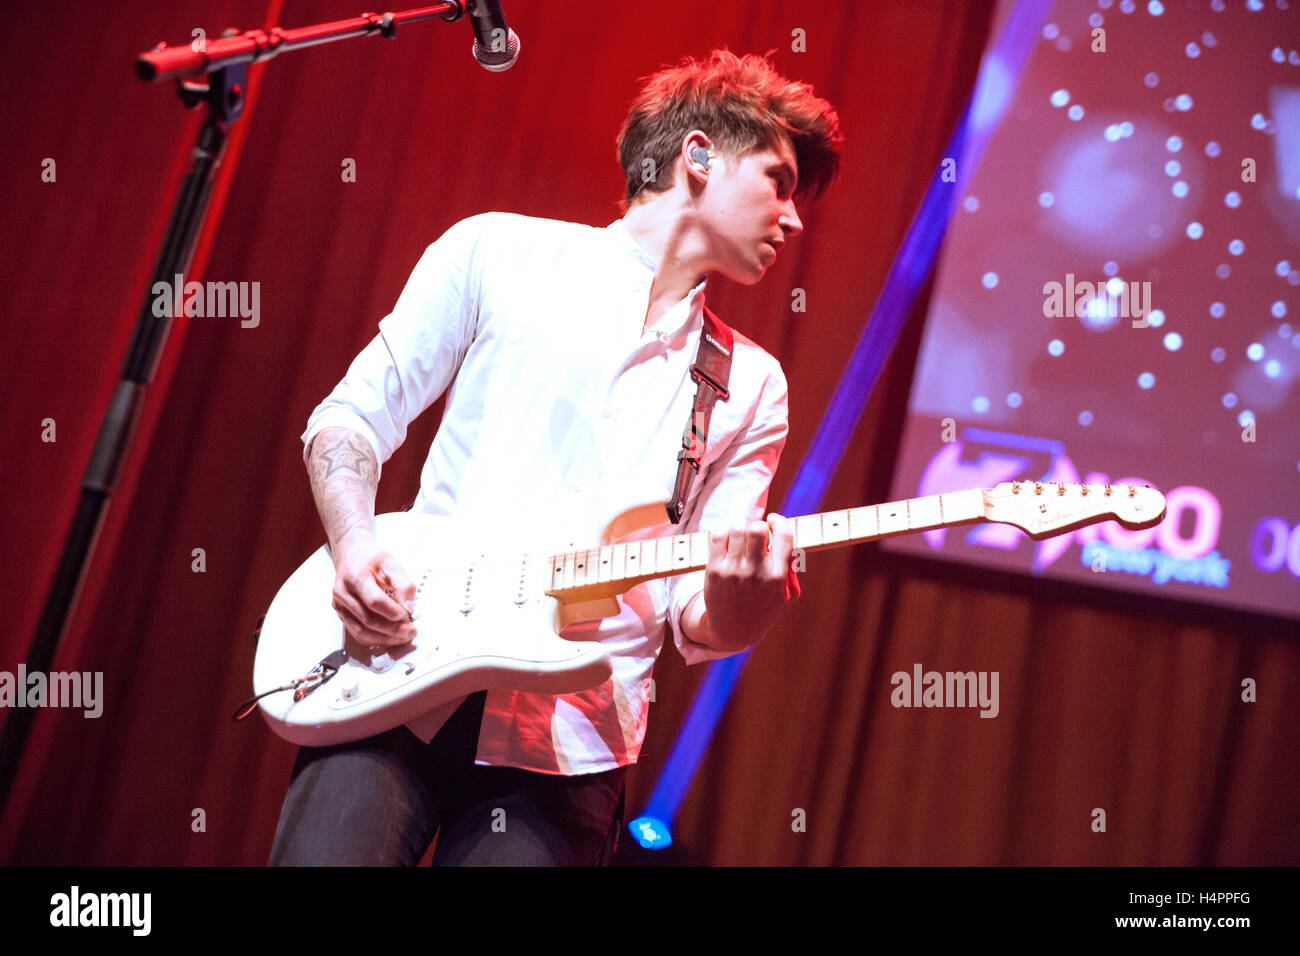 Charley Bagnall performing live in concert with Rixton at Z100 & Coca-Cola All Access Lounge in New York City on December 12th, 2014 Stock Photo